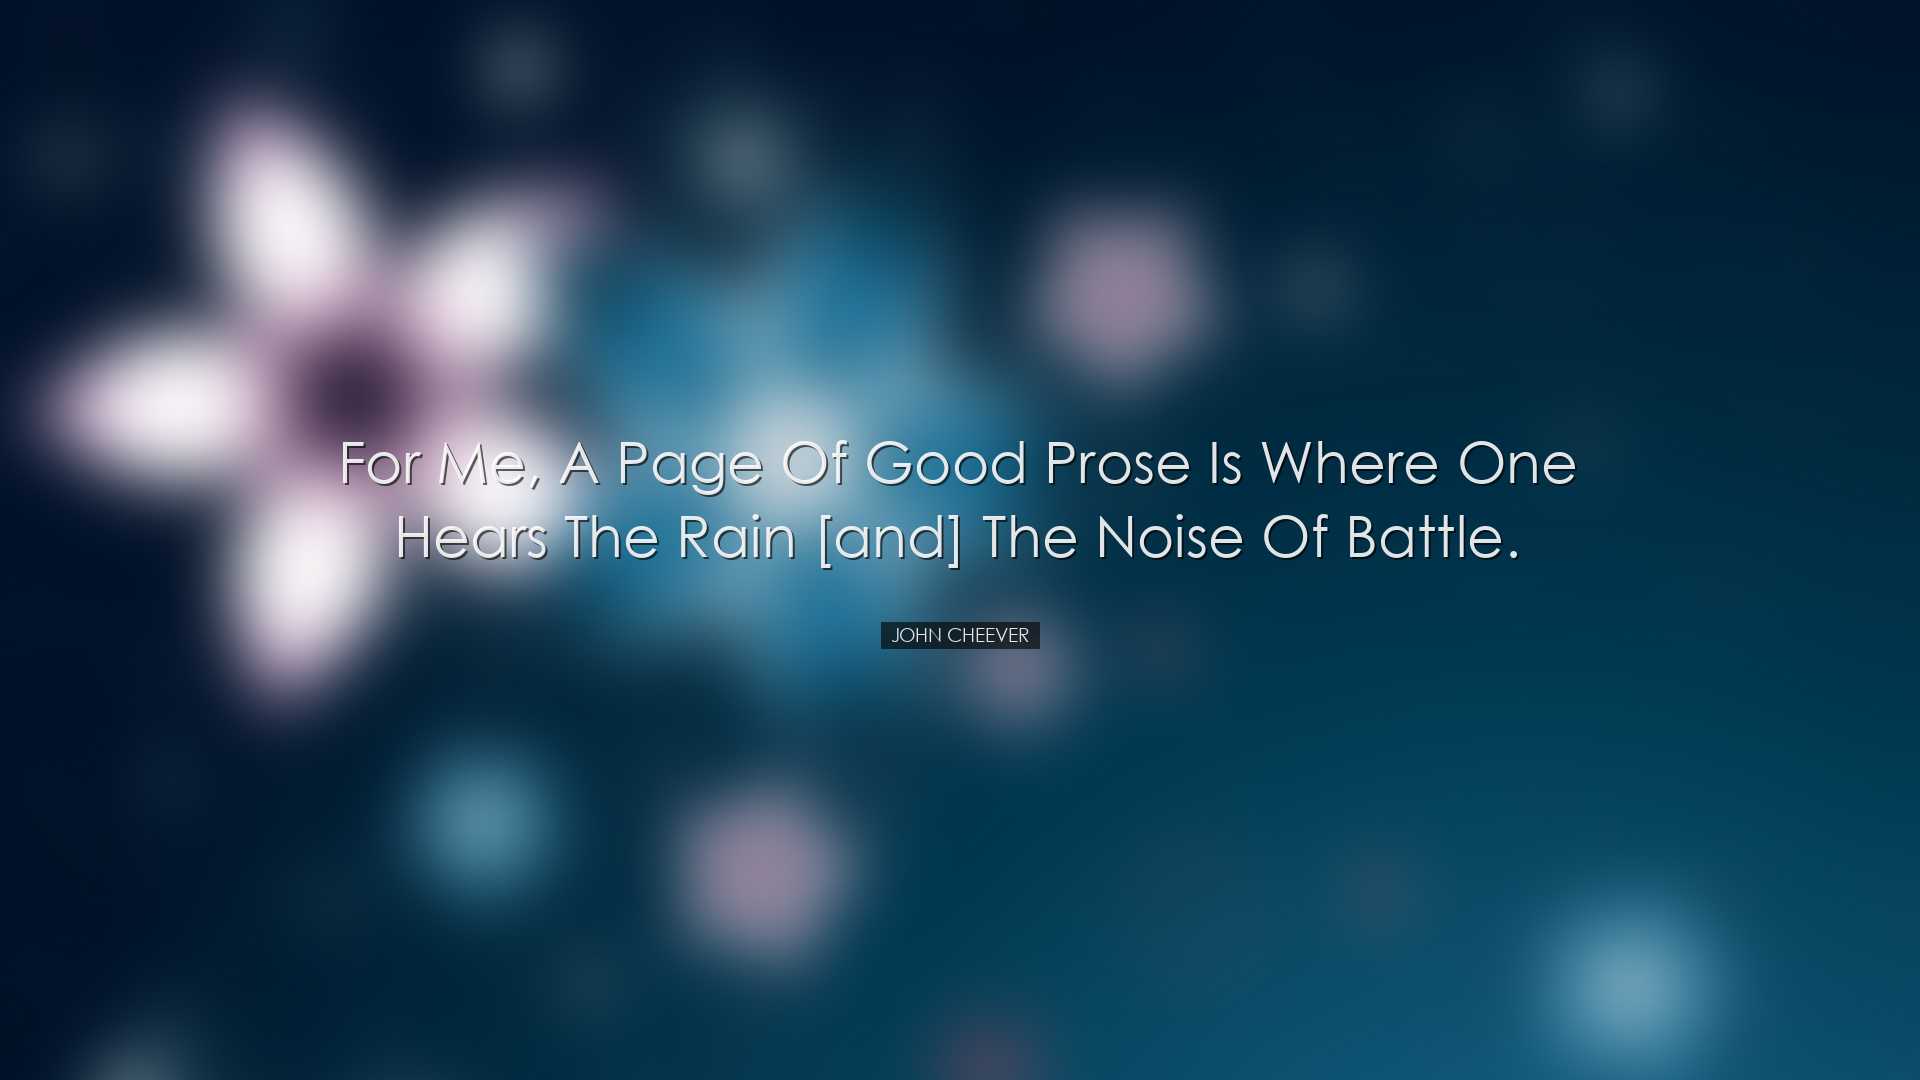 For me, a page of good prose is where one hears the rain [and] the